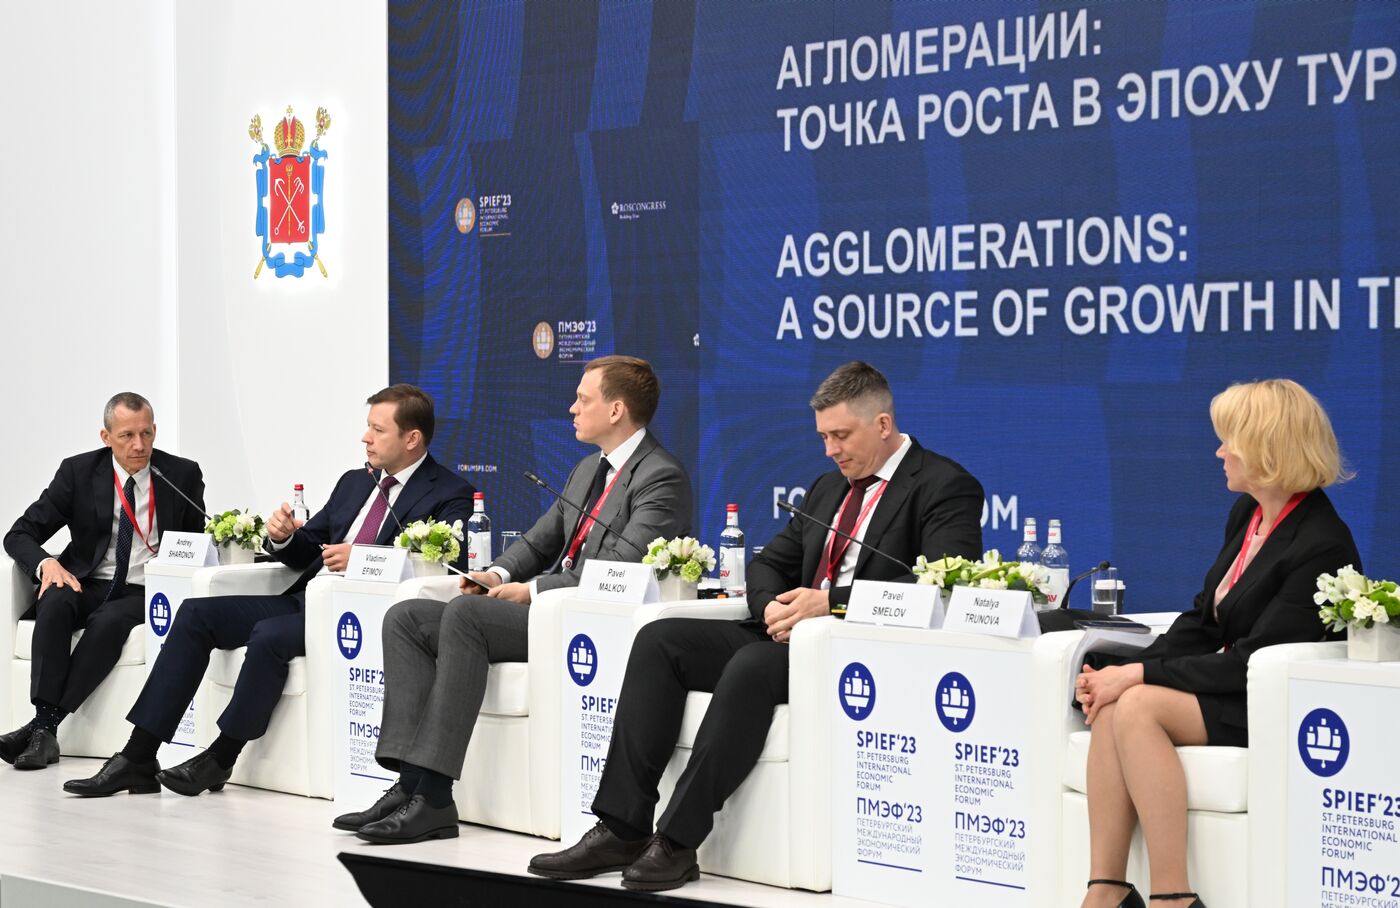 SPIEF-2023. Agglomerations: A Source of Growth in Times of Turbulence